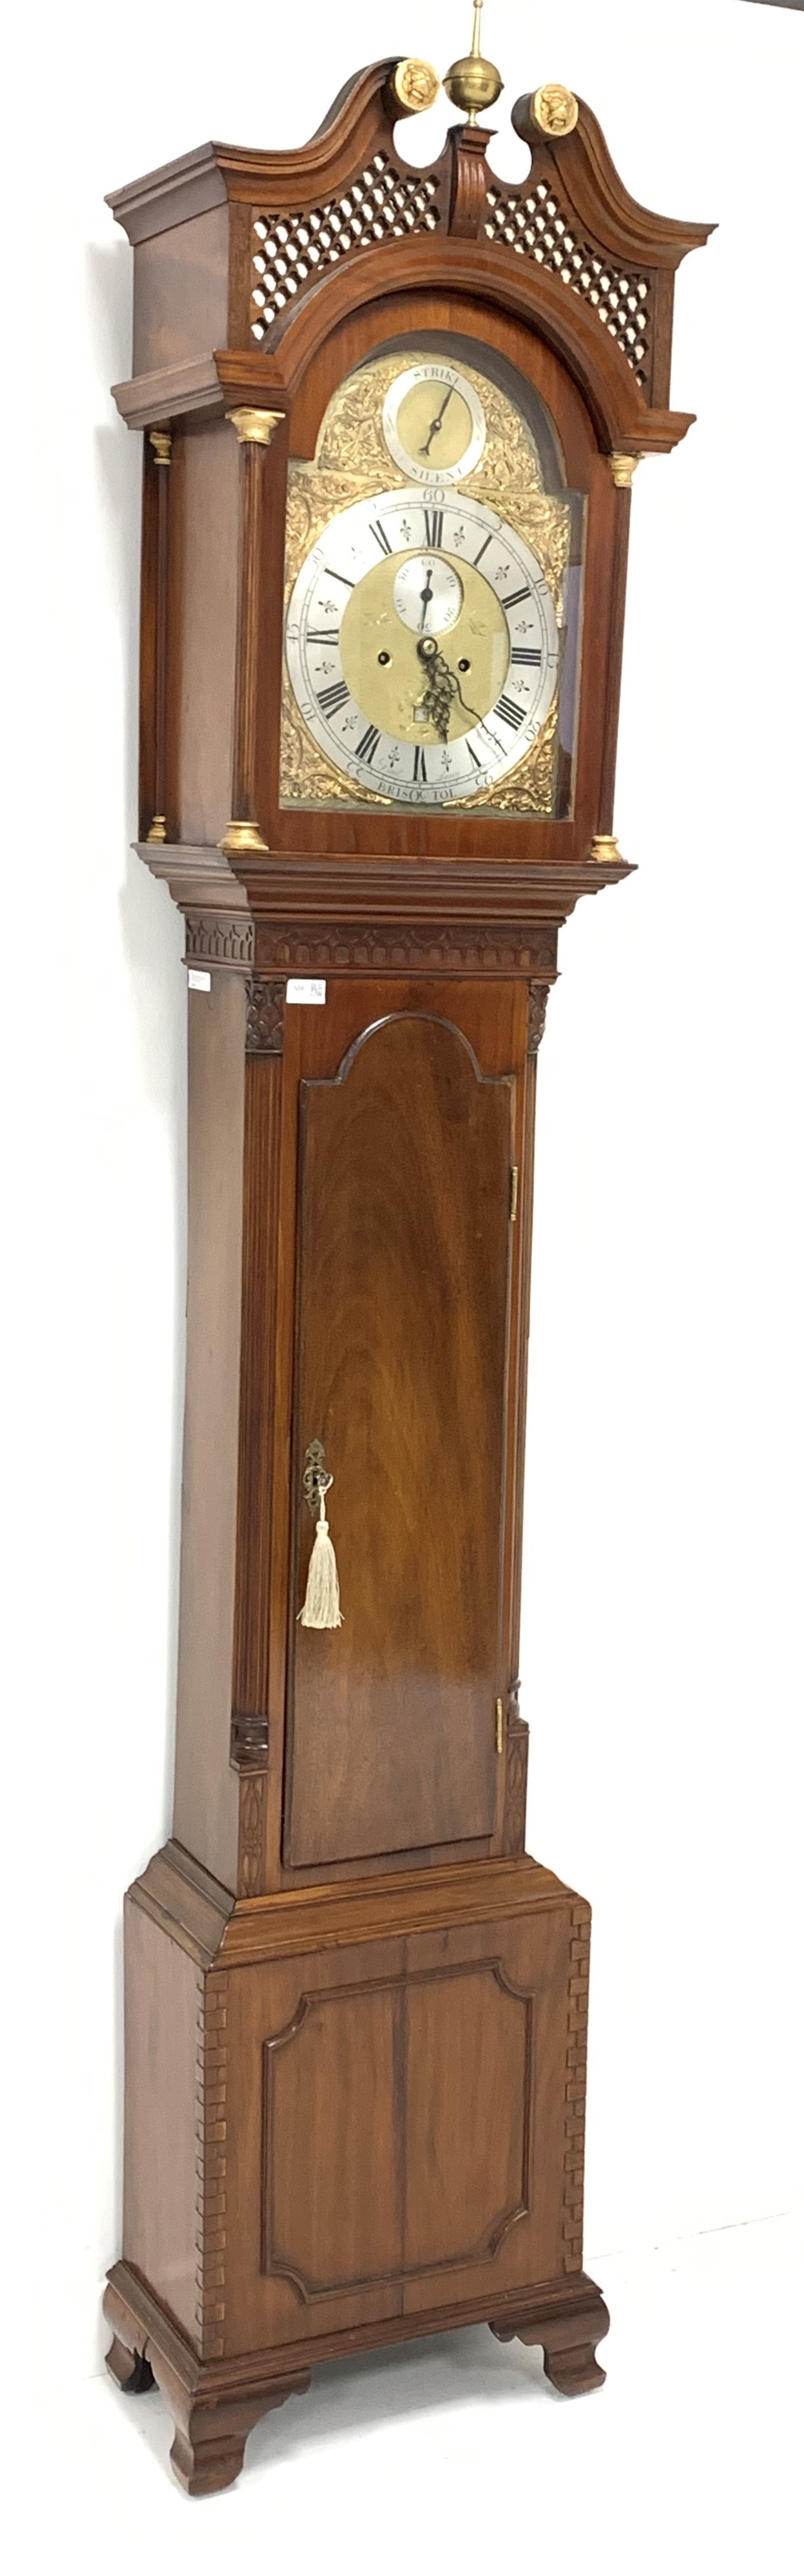 Early 19th century and later long case clock, the 20th century Chippendale style case with brass bal - Image 2 of 5